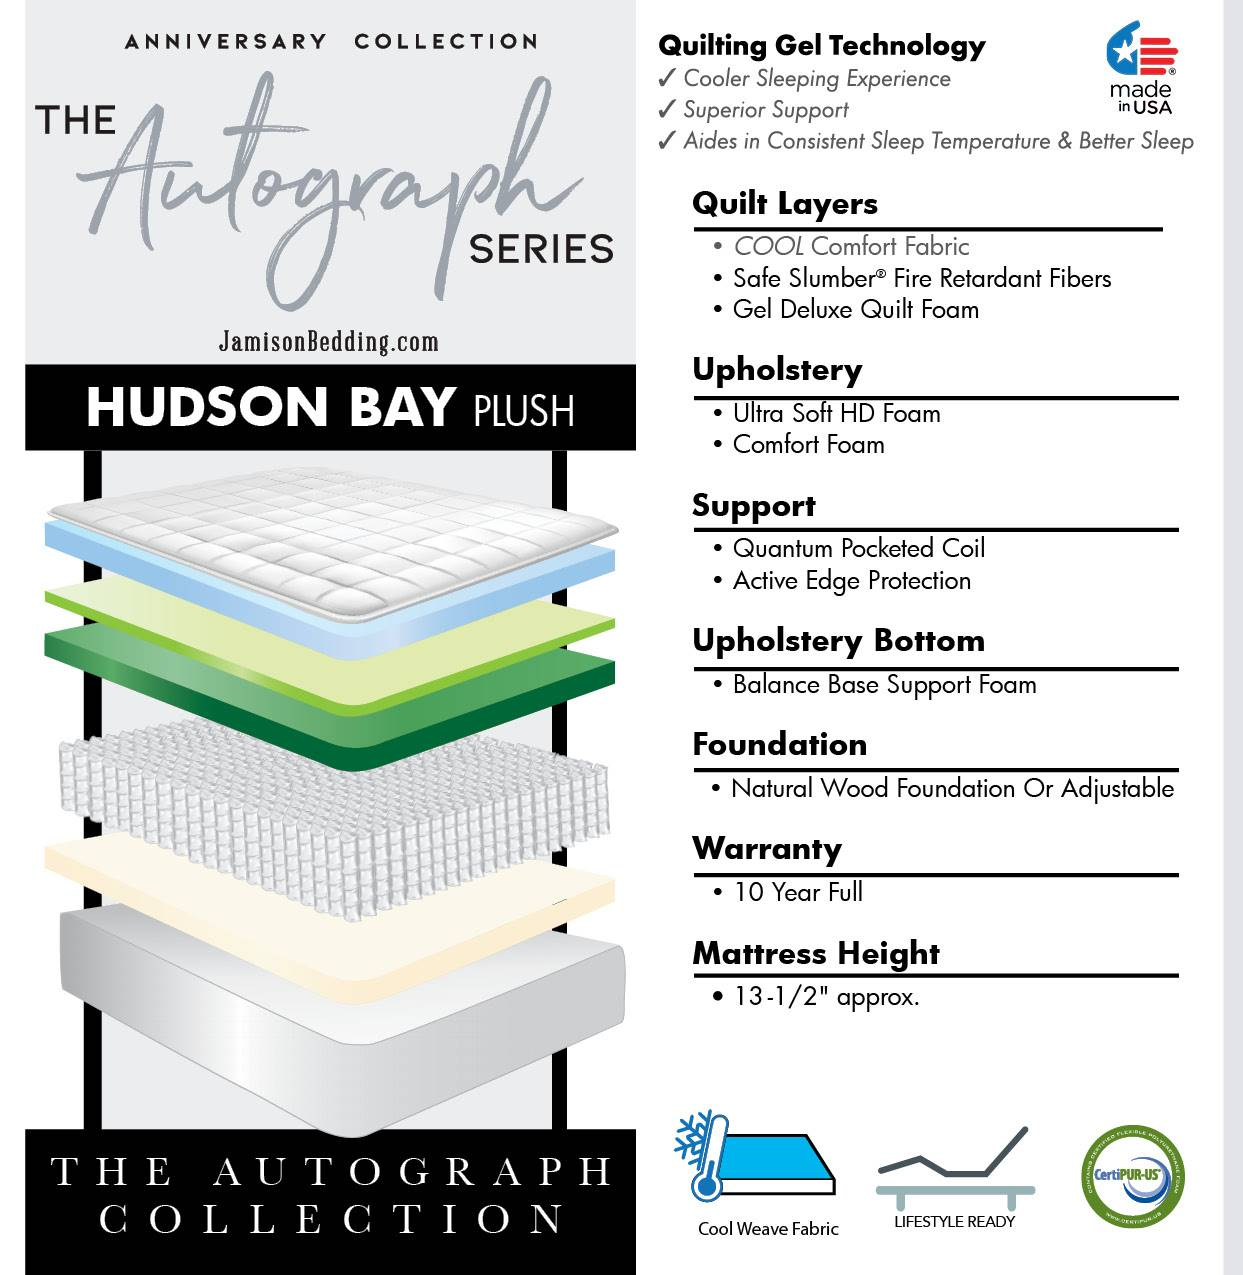 The Jamison Bedding Autograph Series Hudson Bay plush mattress is available at Bratz-CFW in Fort Myers, FL. Spec sheet.